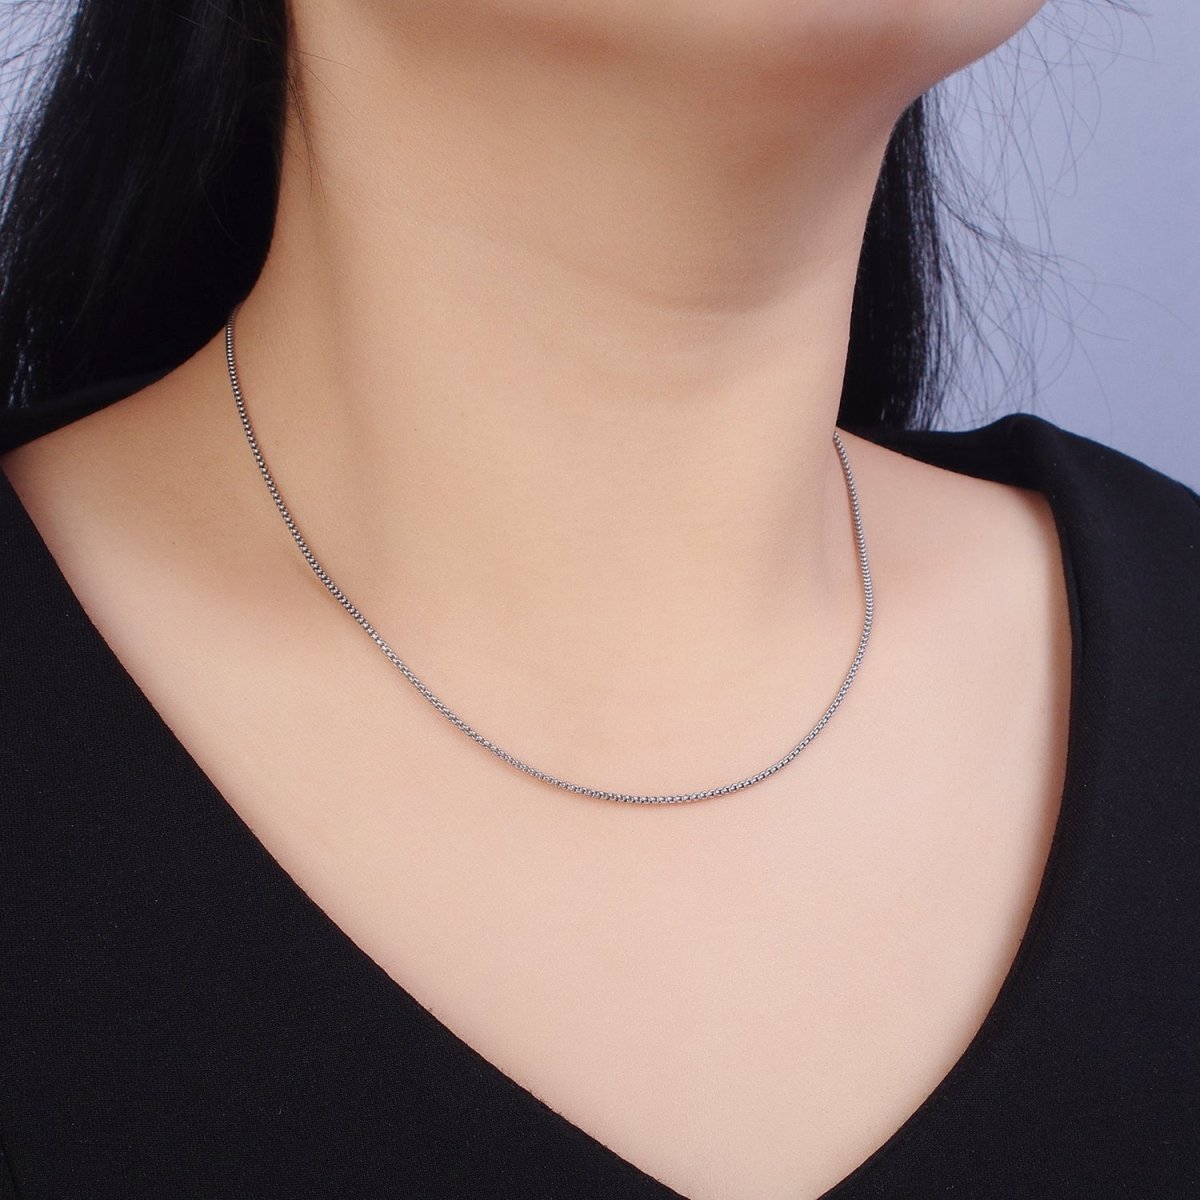 Dainty Stainless Steel Cable Rolo Chain Necklace 1.2mm Thin Dark Gold Box Chain 17.7 inches for Jewelry Making | WA-1703 WA-1704 Clearance Pricing - DLUXCA